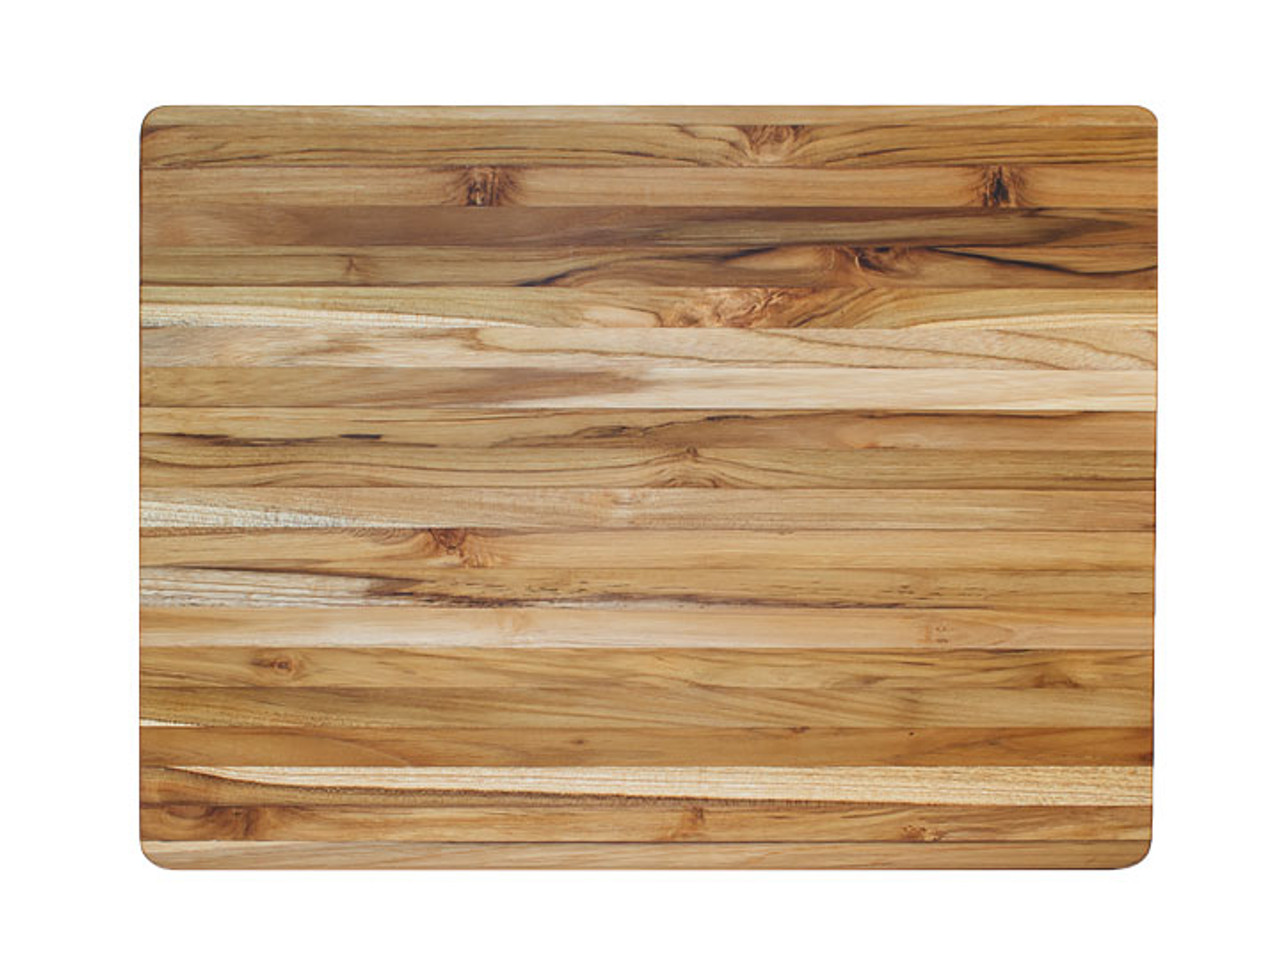 Cutting Boards – Plastic, Wooden or Glass?